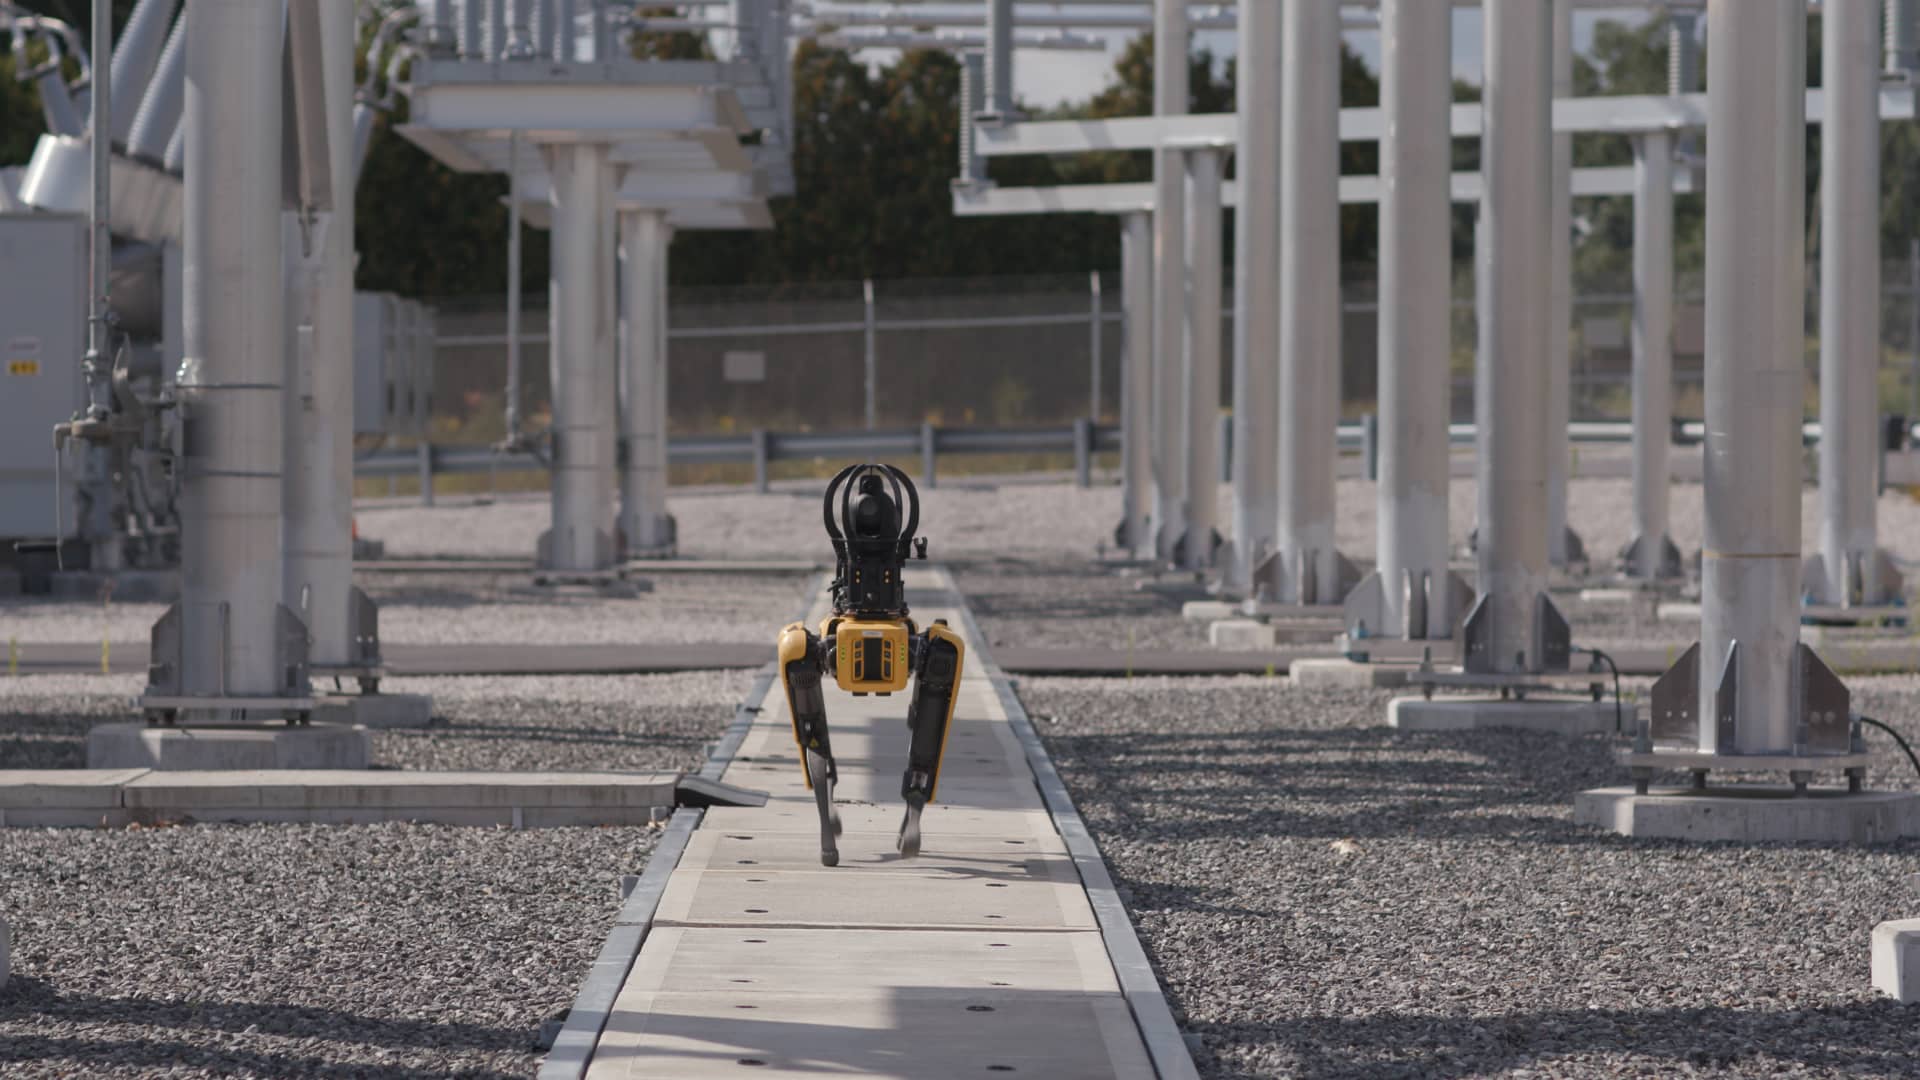 Boston Dynamics' Spot robot performs an inspection at a National Grid substation in Massachusetts.